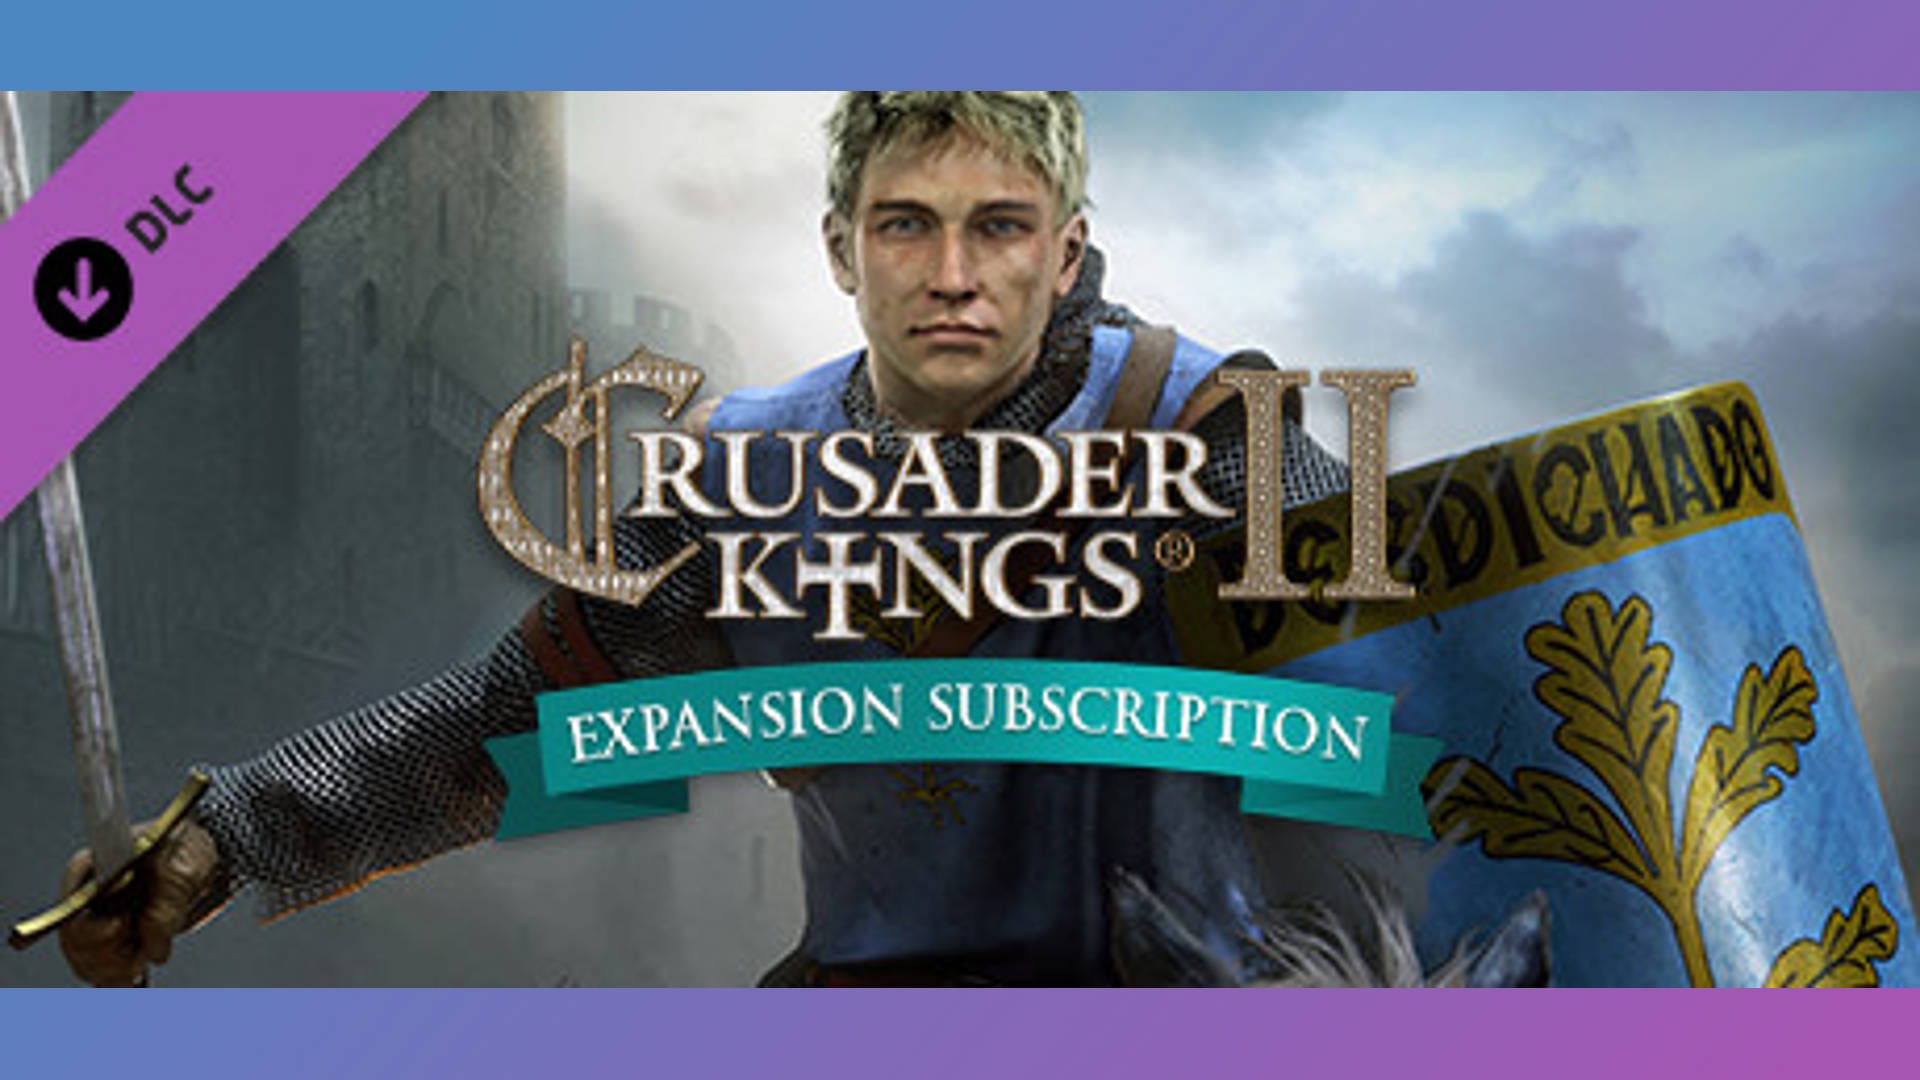 Crusader Kings 2 Expansion Subscription cover